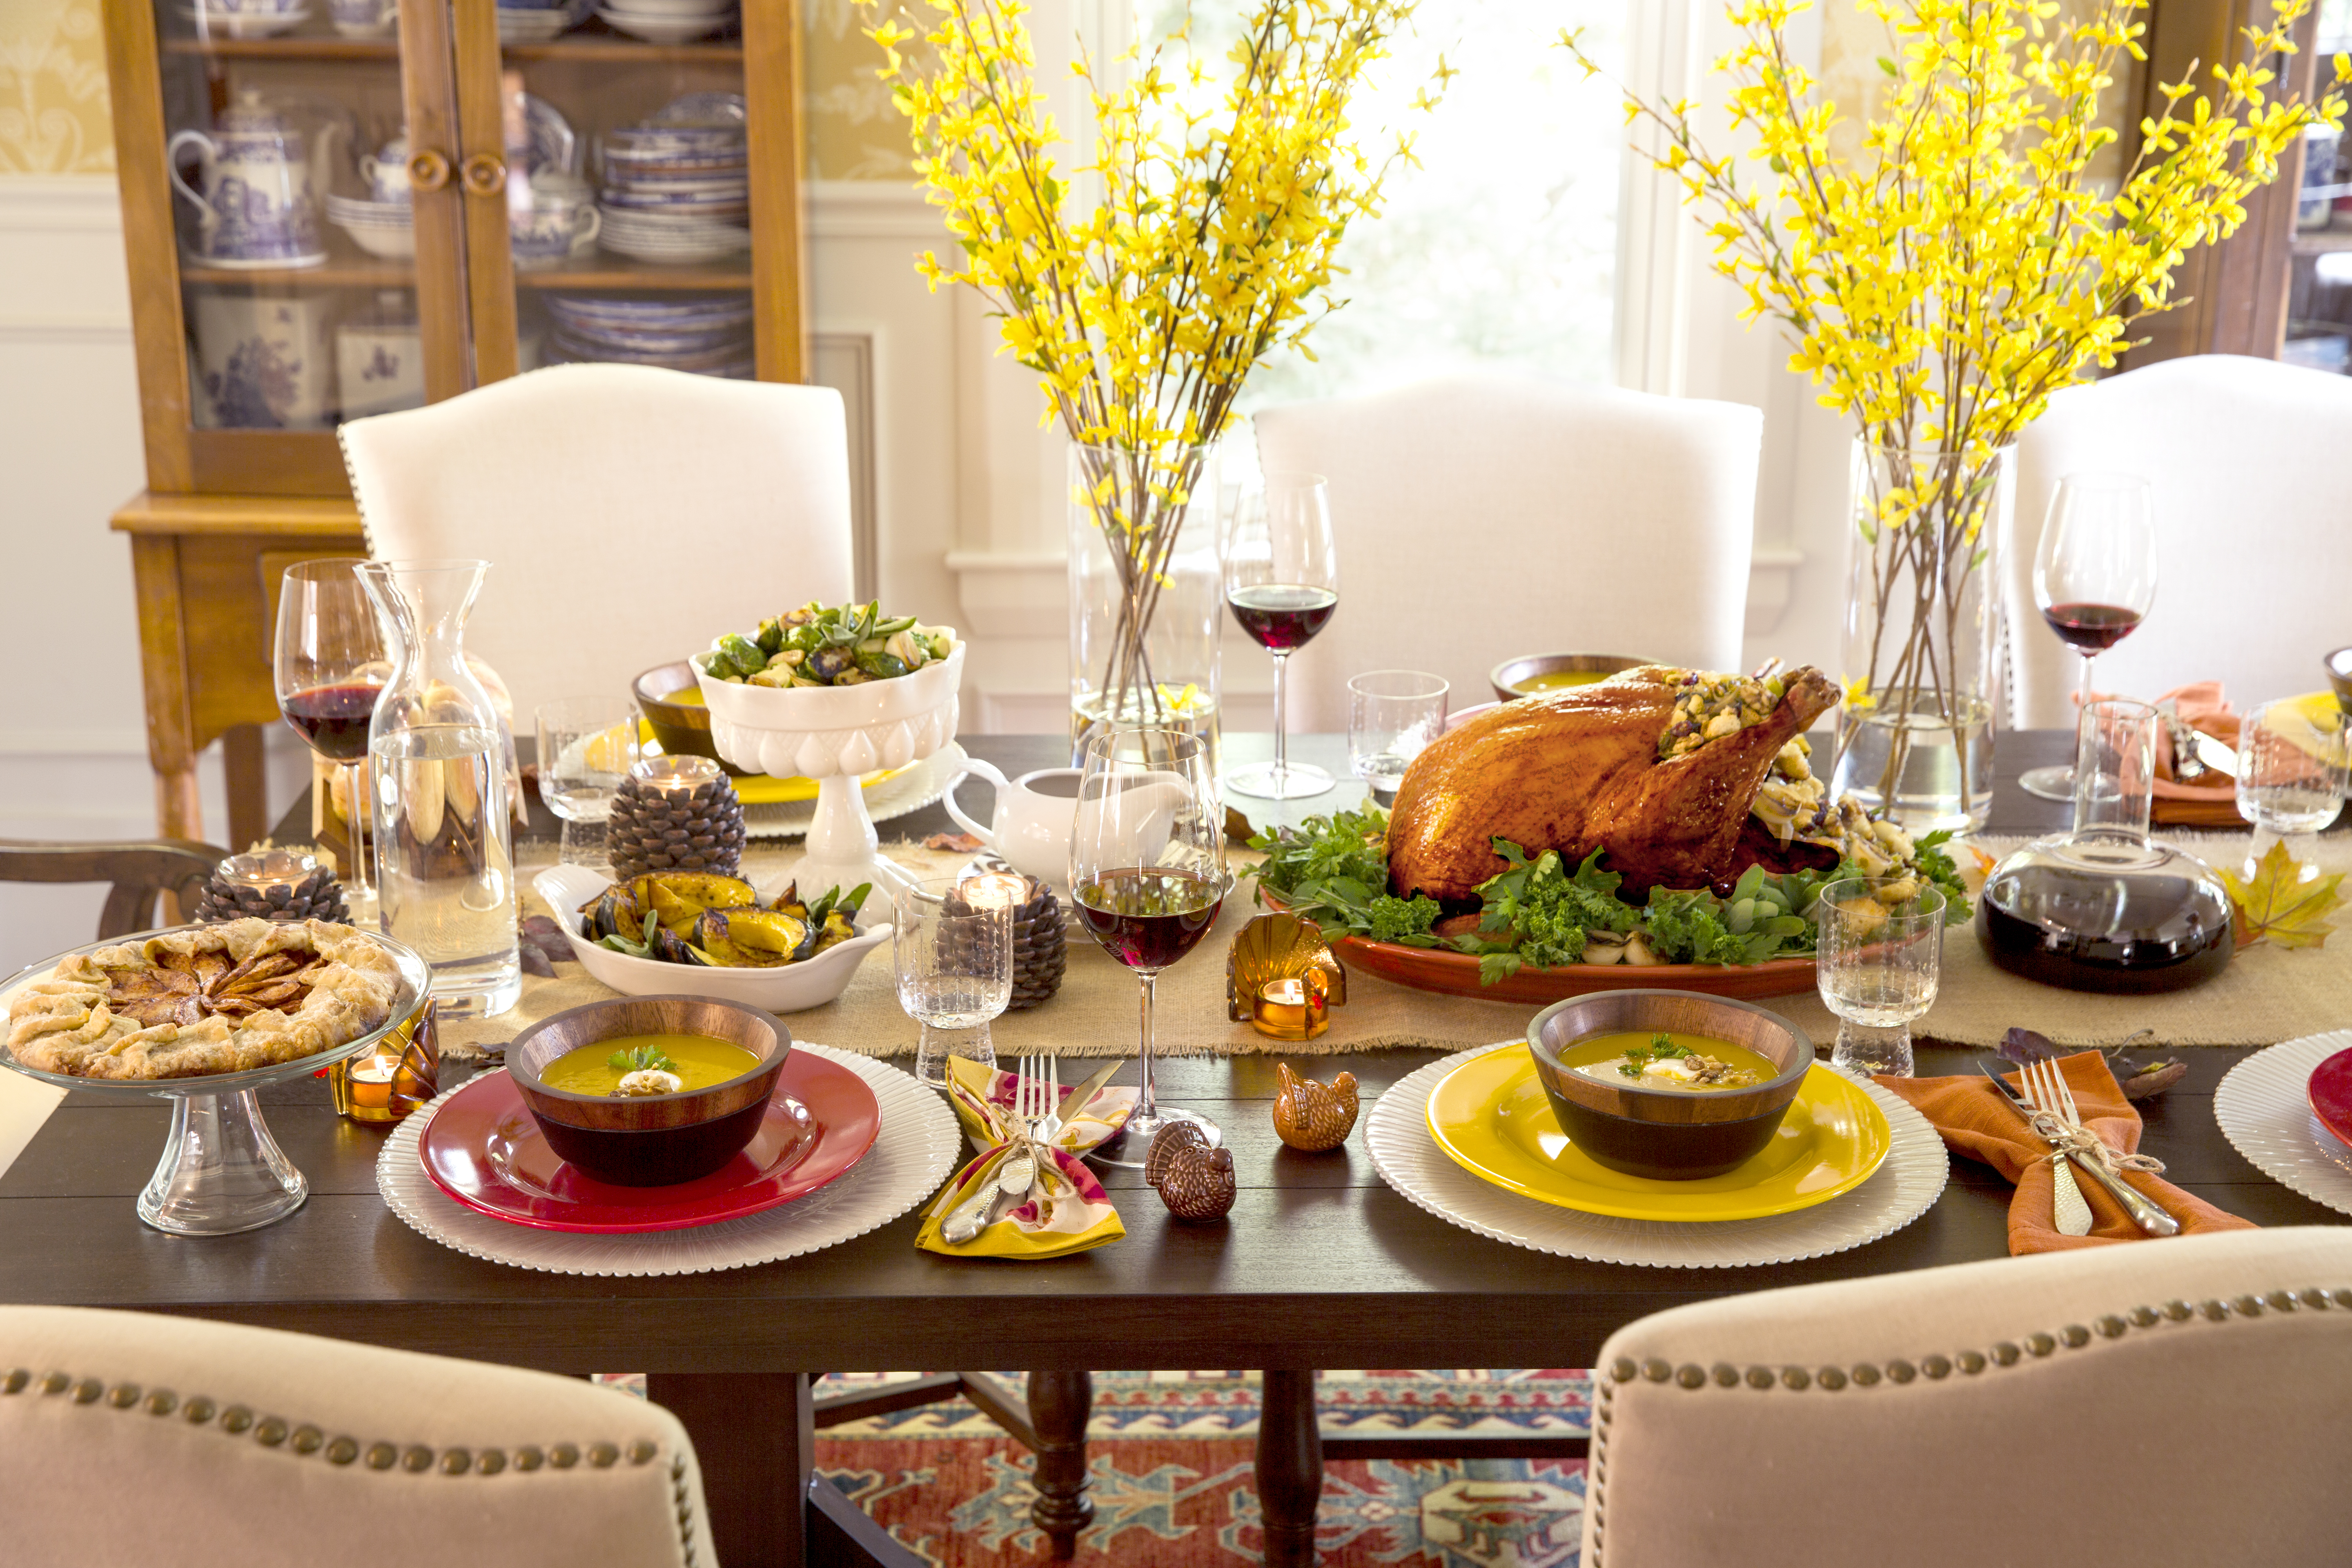 Thanksgiving Table with Food - Celebrations at Home